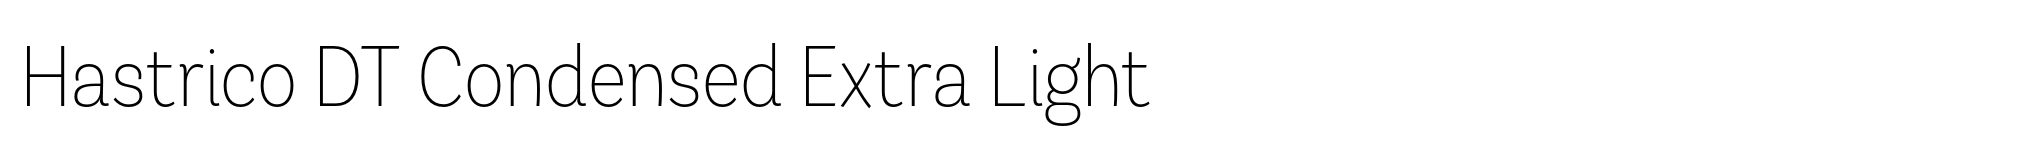 Hastrico DT Condensed Extra Light image